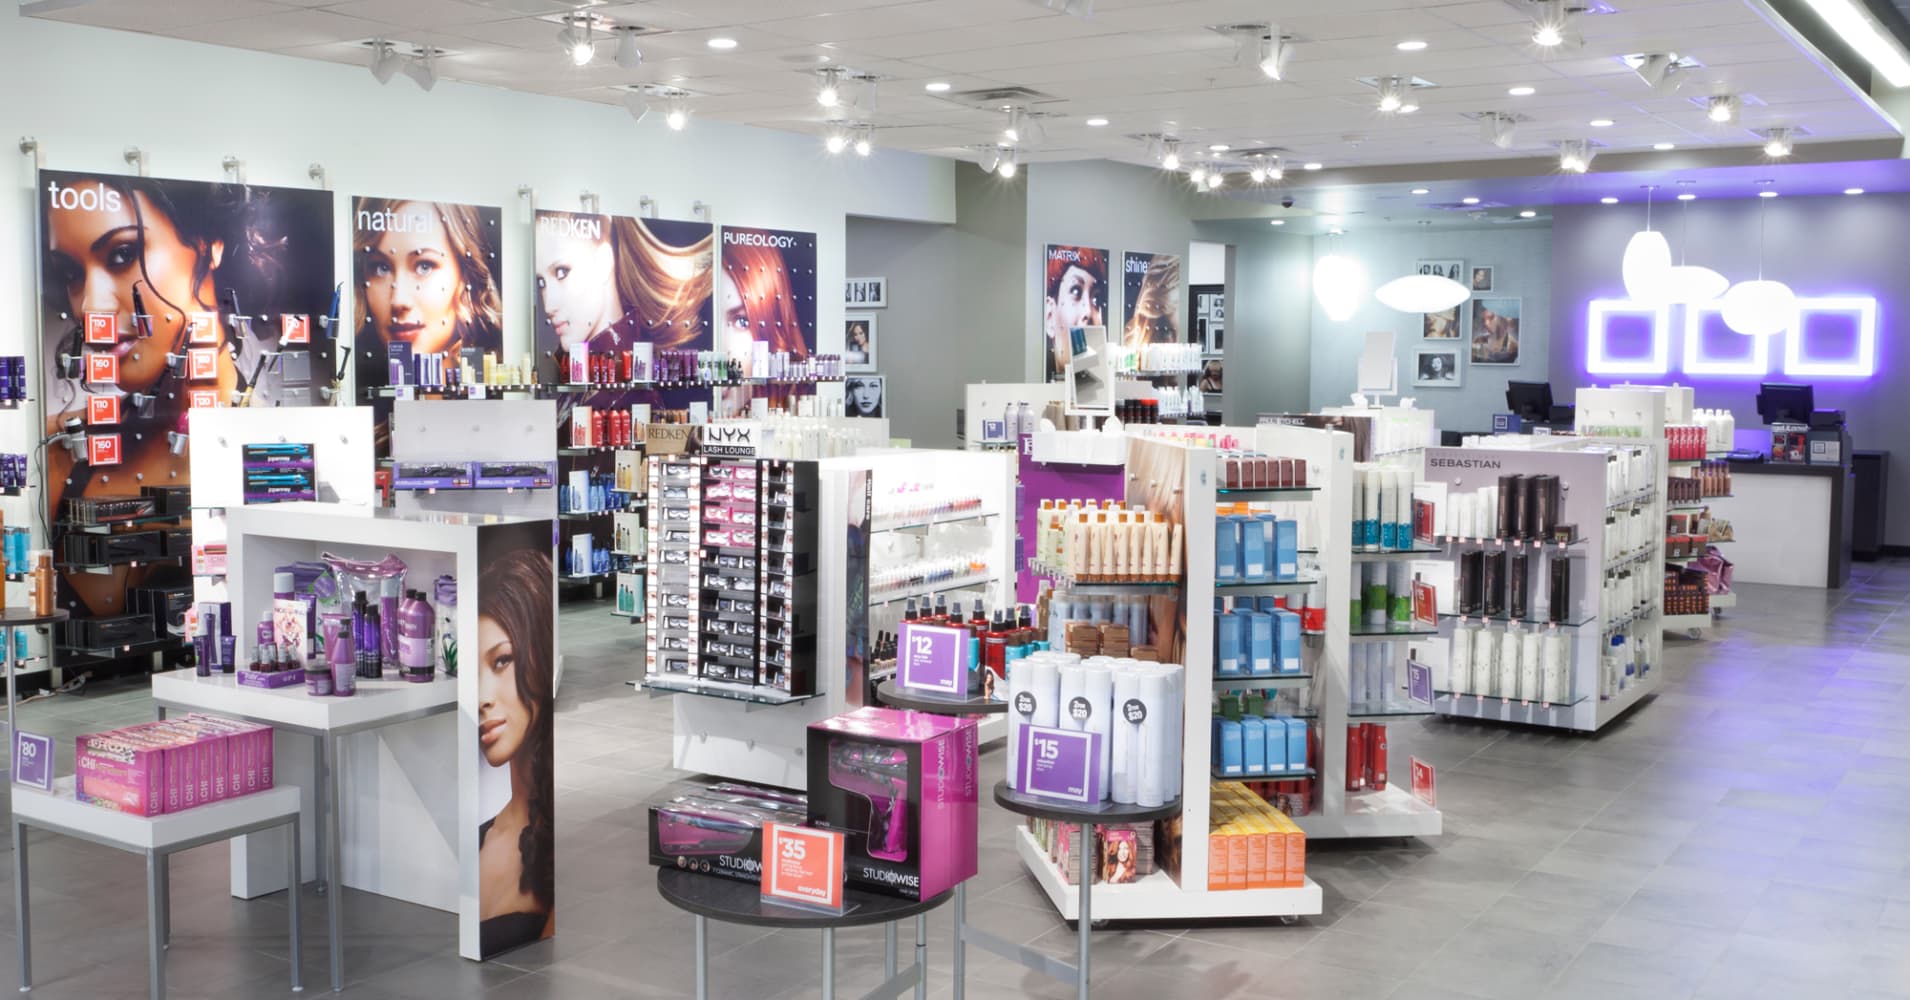 How do you find information about JCPenney salon specials?